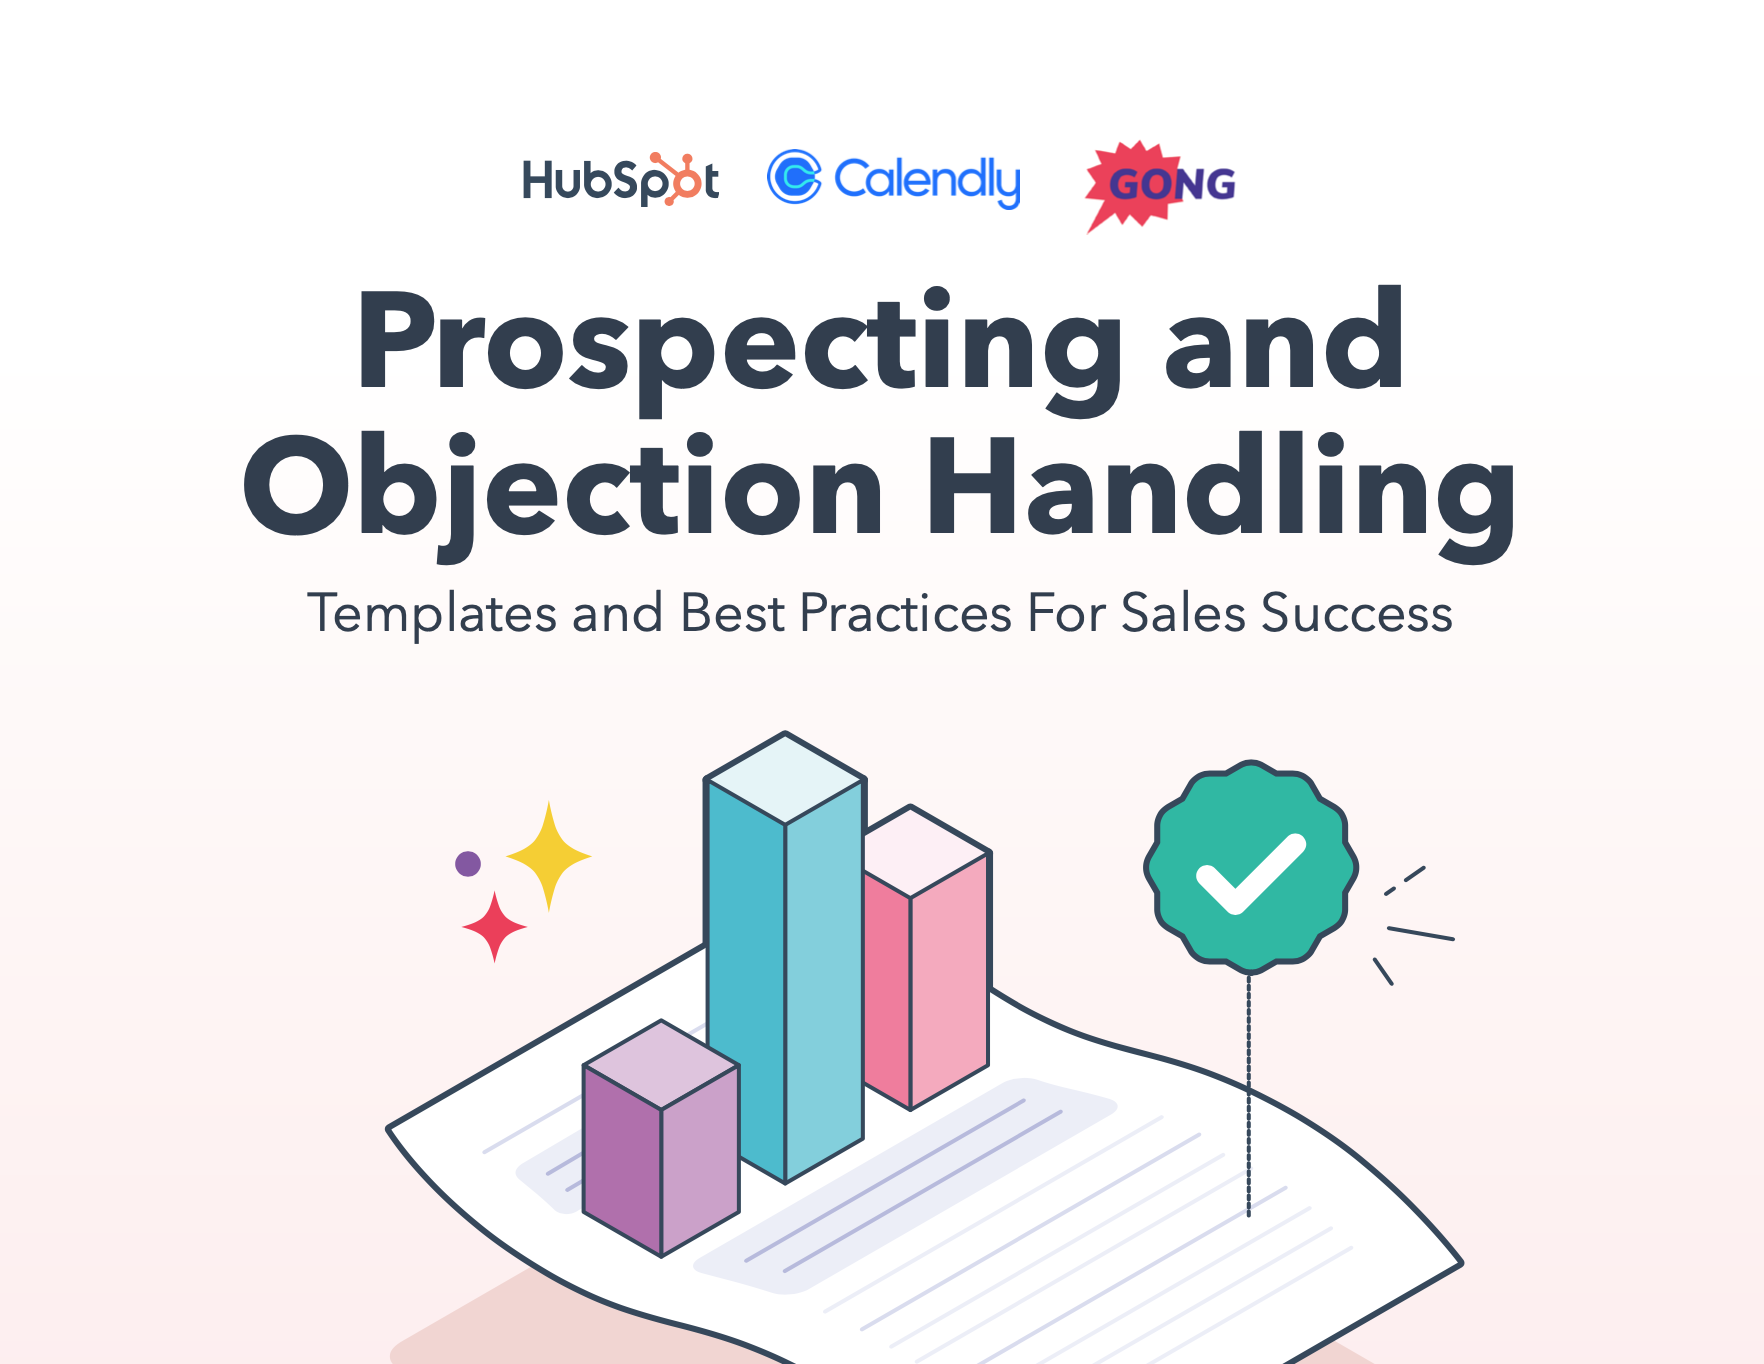 Prospecting and Objecting Handling Guide from HubSpot, Calendly, and Gong